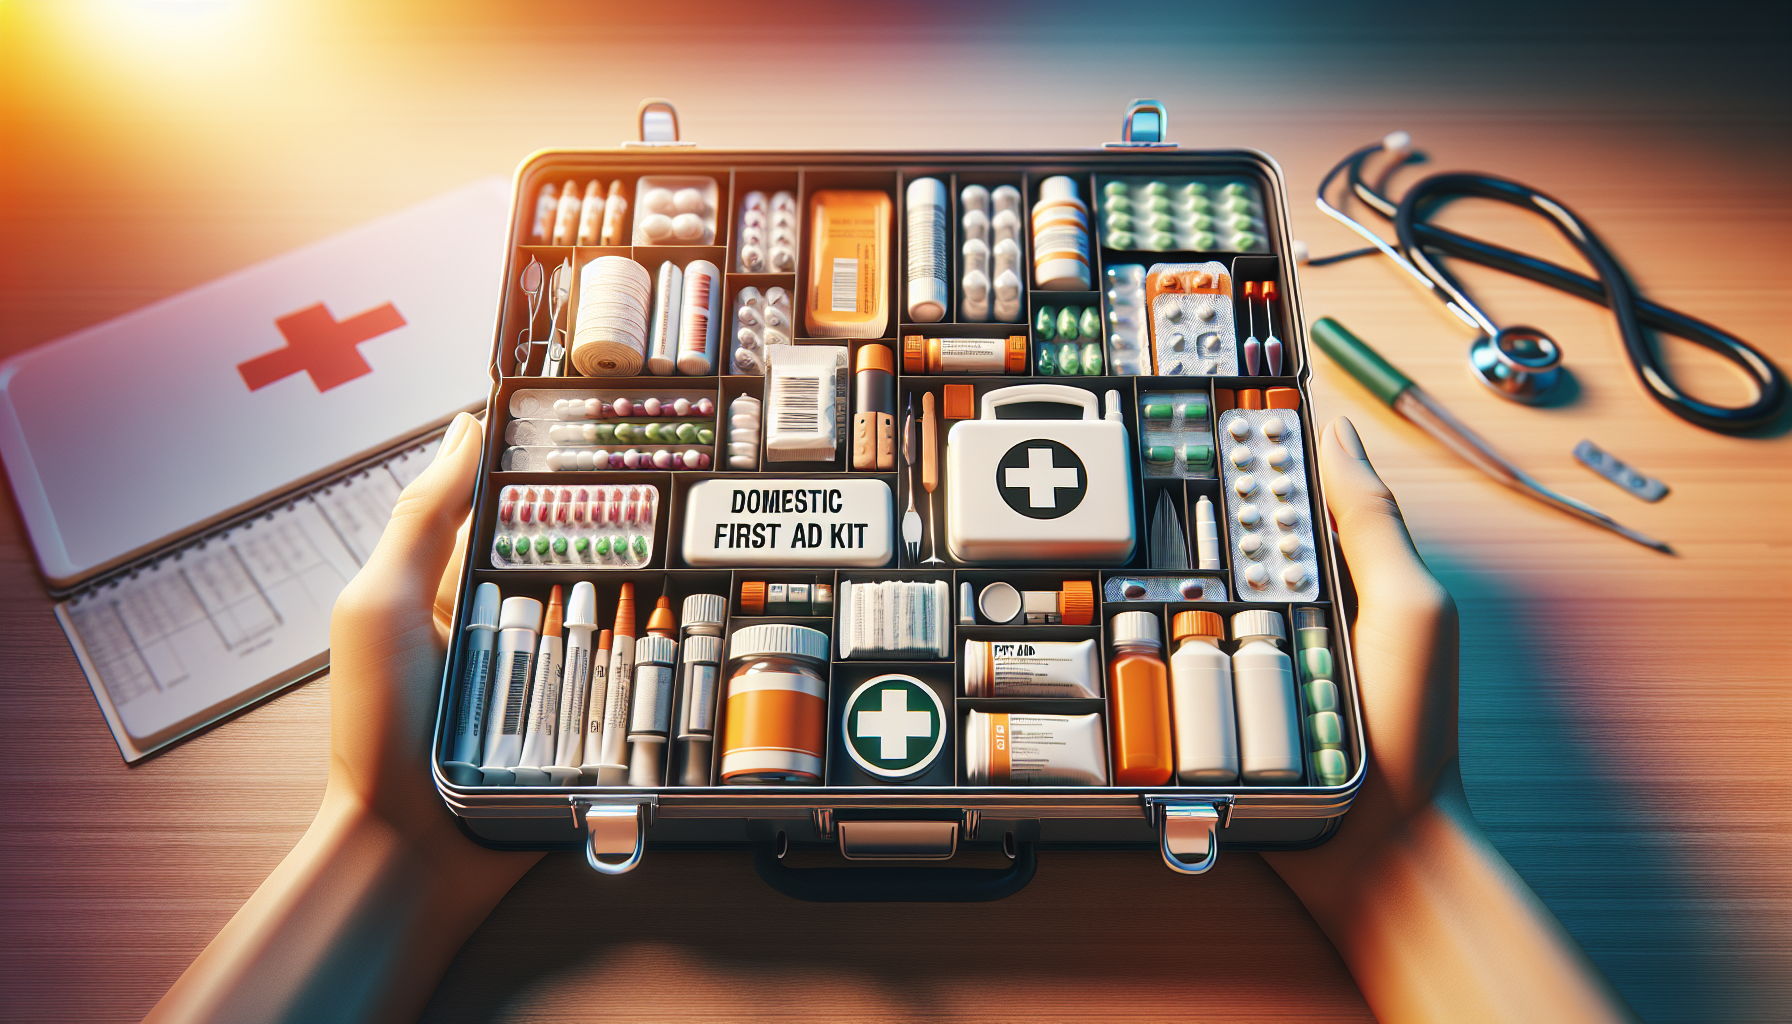 Beginners Guide To Building A Home First Aid Kit